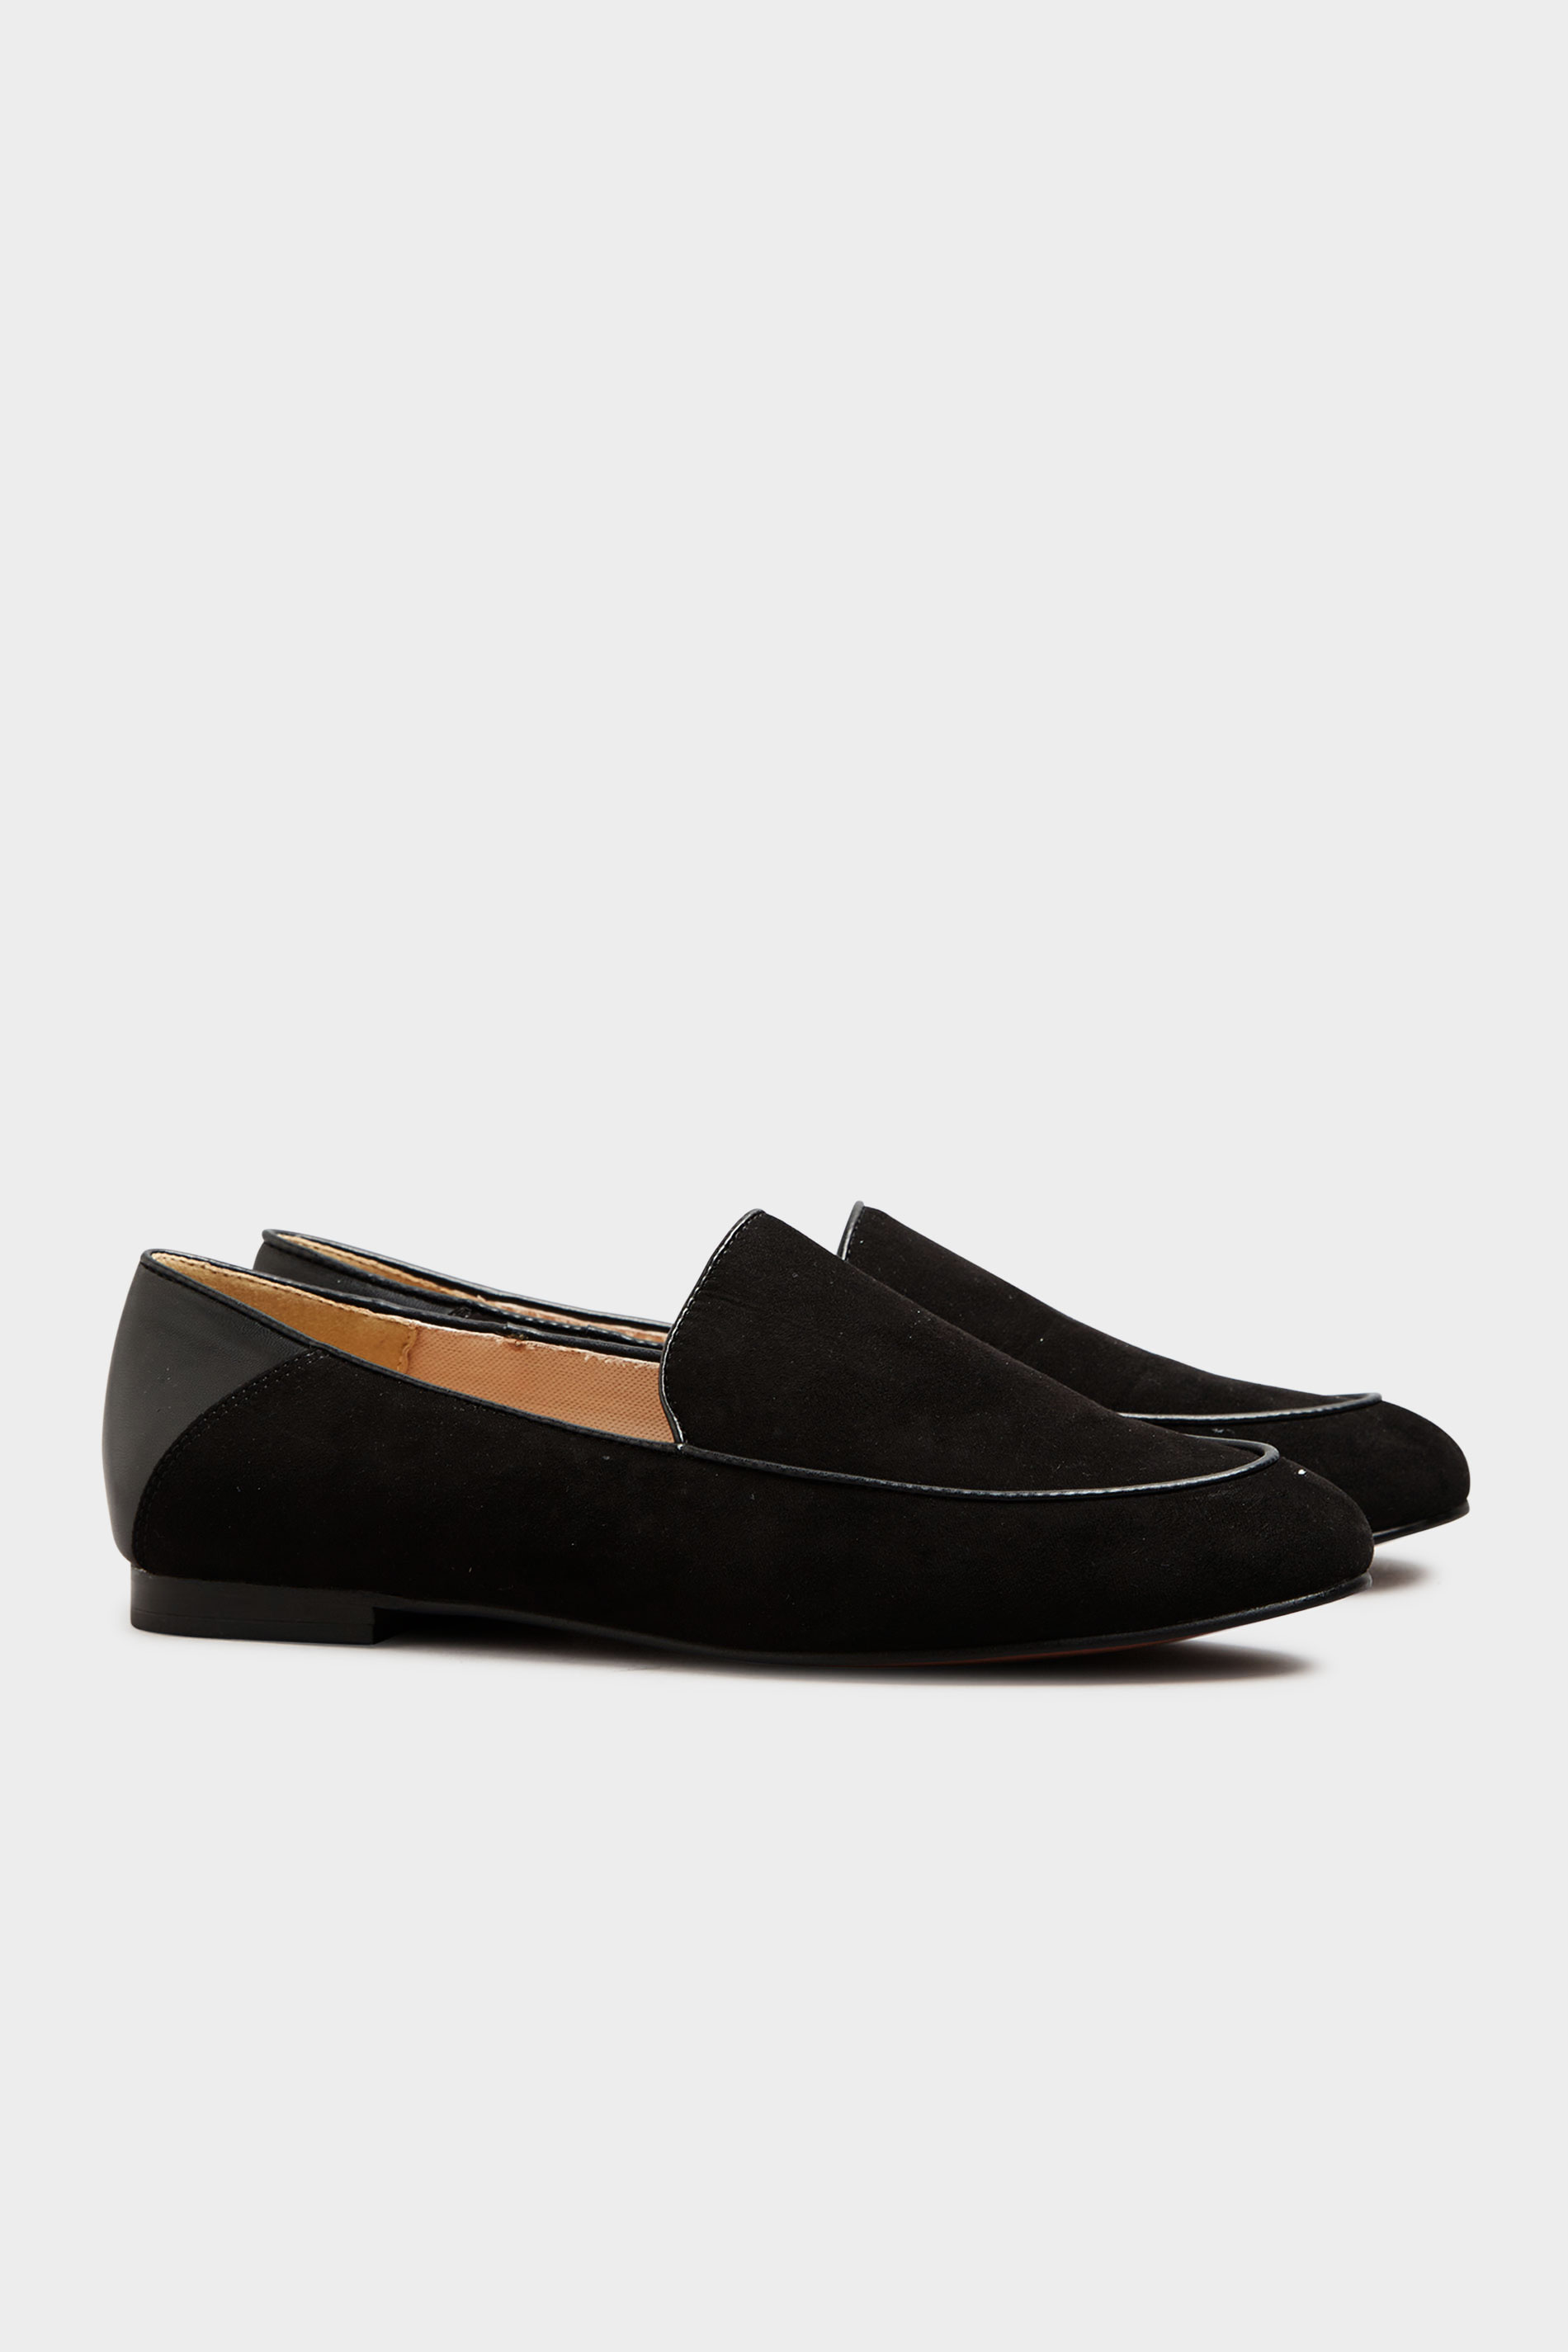 LTS Black Suede Loafers In Standard Fit | Long Tall Sally